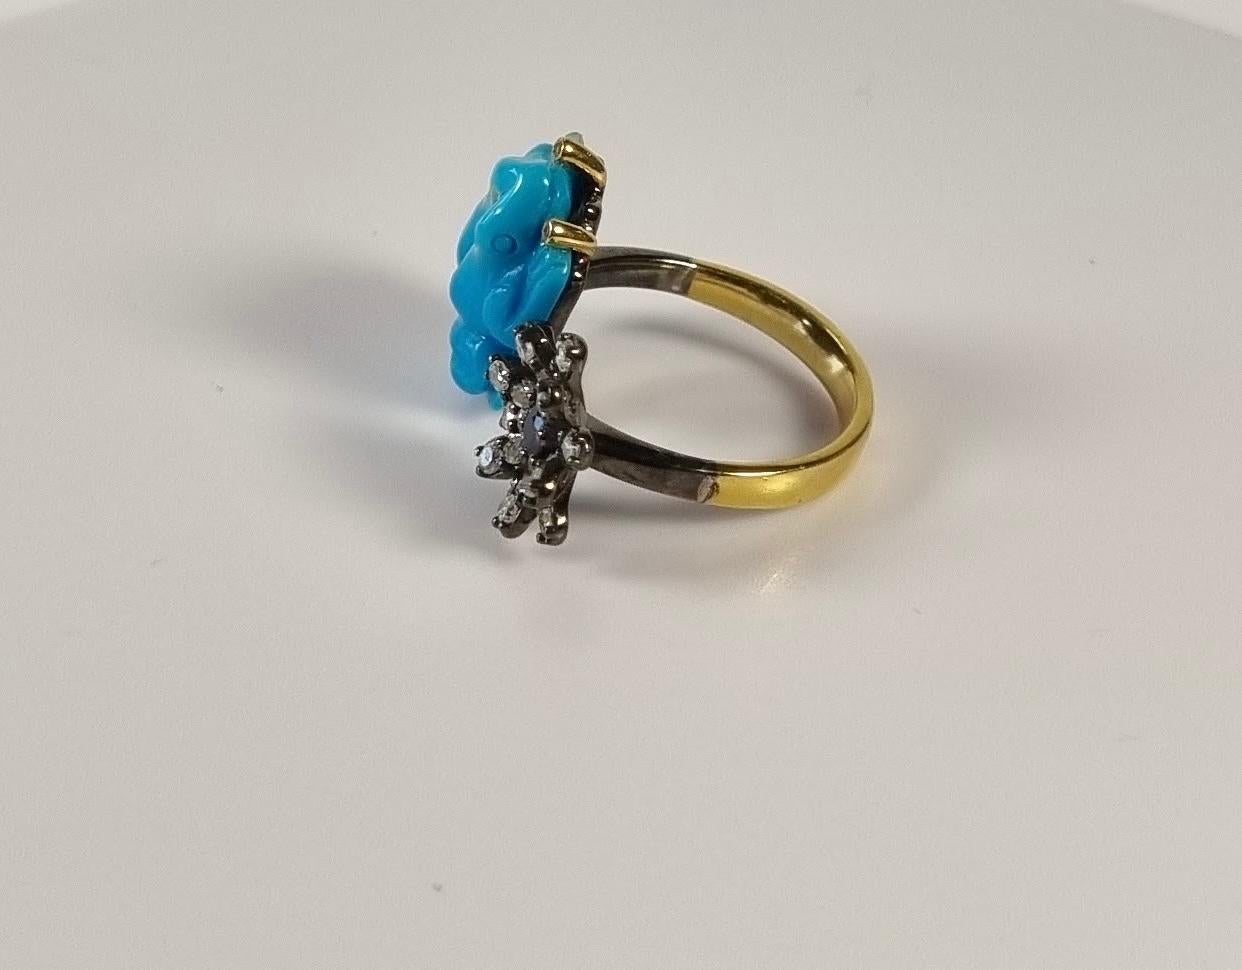 Irama Pradera is a Young designer from Spain that searches always for the best gems and combines classic with contemporary mounting and styles. 
Lucky Frog with Flower Ring Turquoise, Sapphire, Diamonds in 18k Gold & Silver
Sleekly crafted in 18K